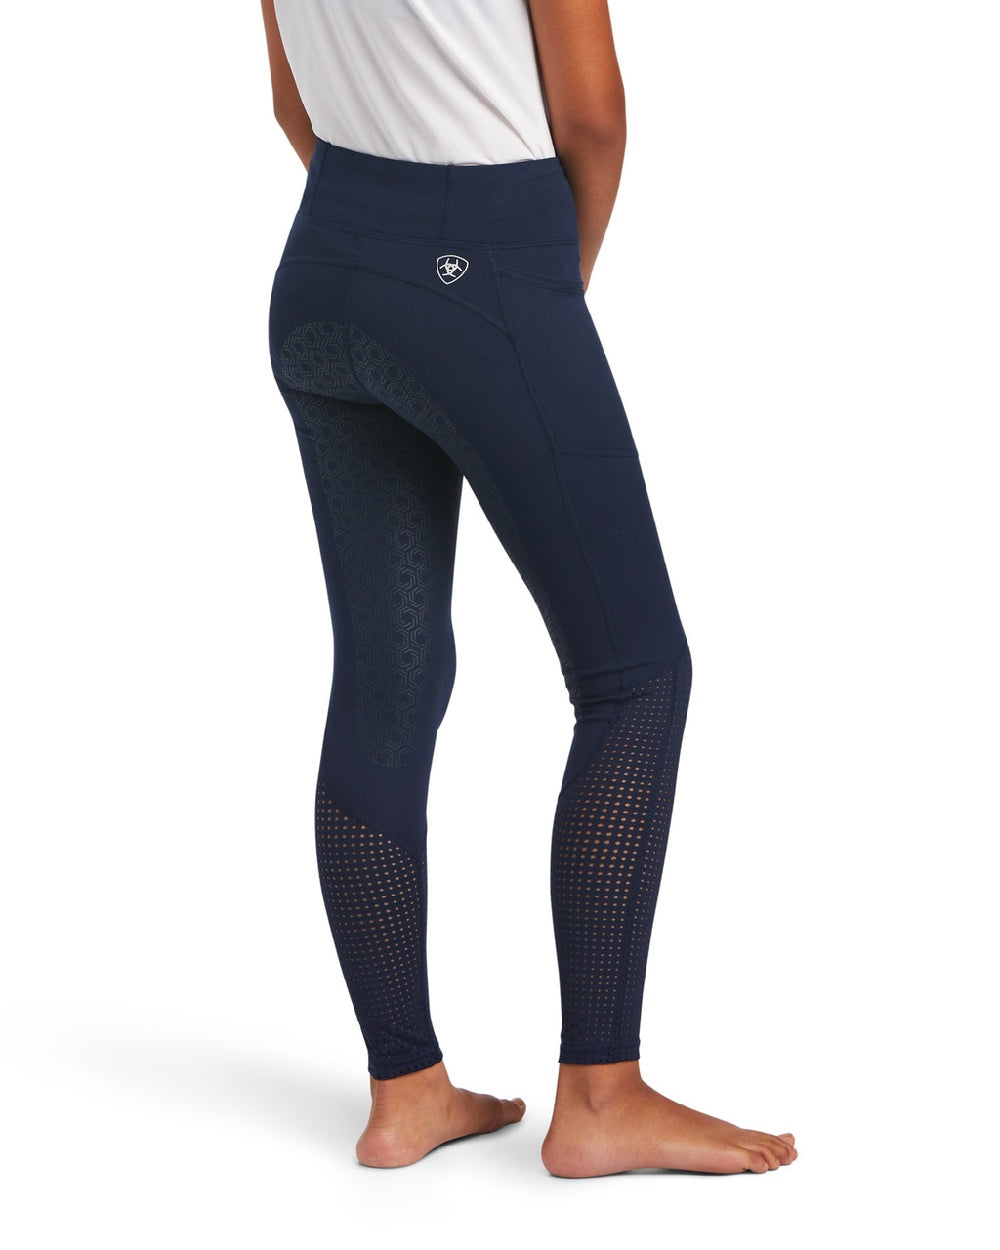 Ariat Childrens Eos Full Seat Tights in Navy